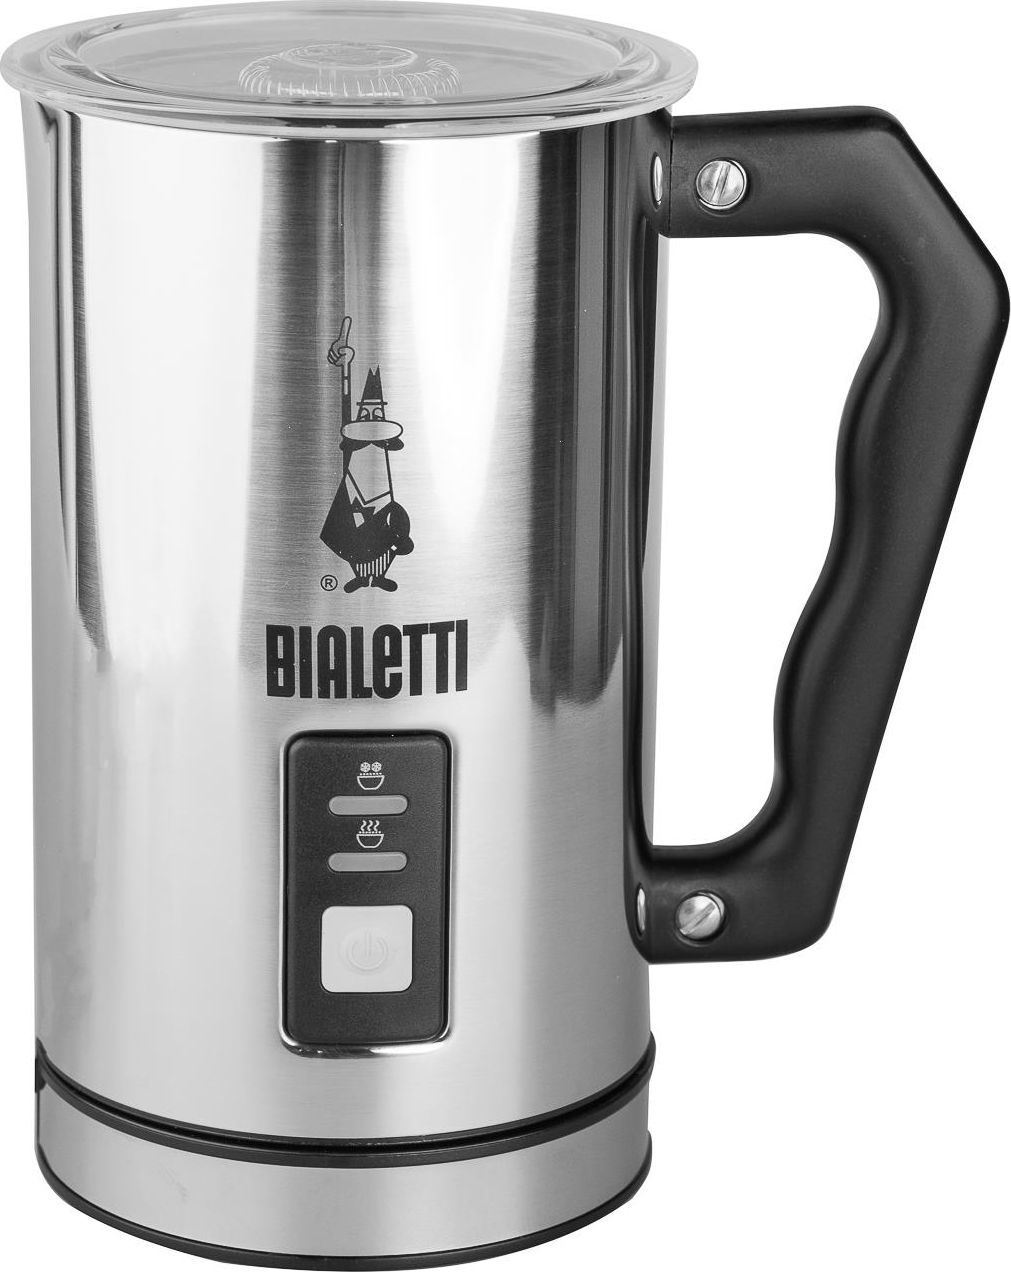 Bialetti Electric Milk Frother 4430 - stainless steel